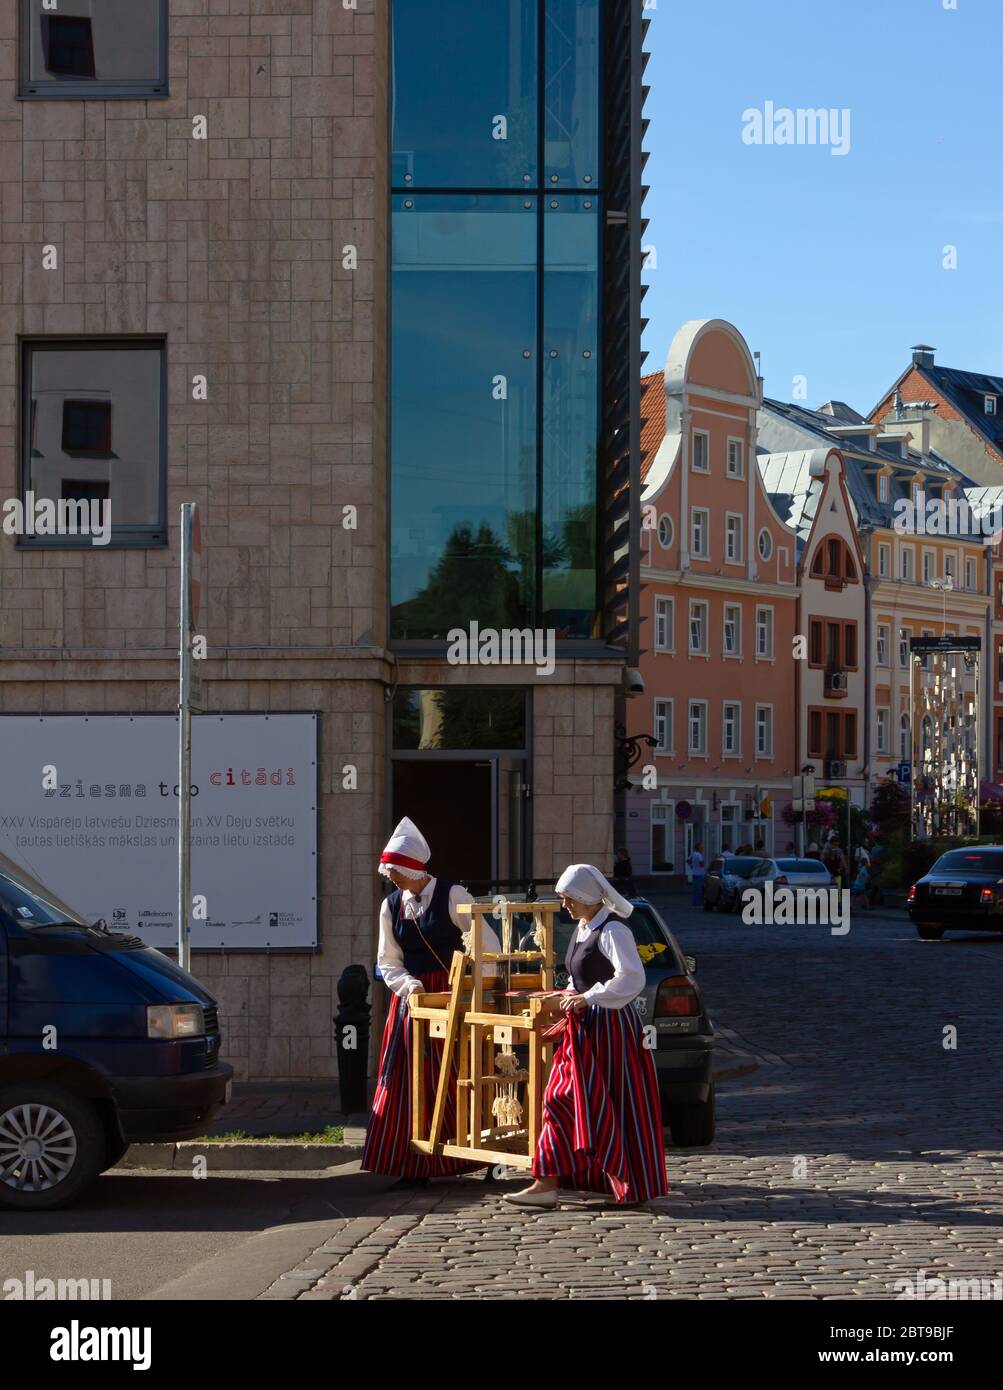 RIGA, Latvia - July 17, 2013: Two women wearing a folk costume are carrying a tradirional wooden artifact on a street in downtown Riga Stock Photo